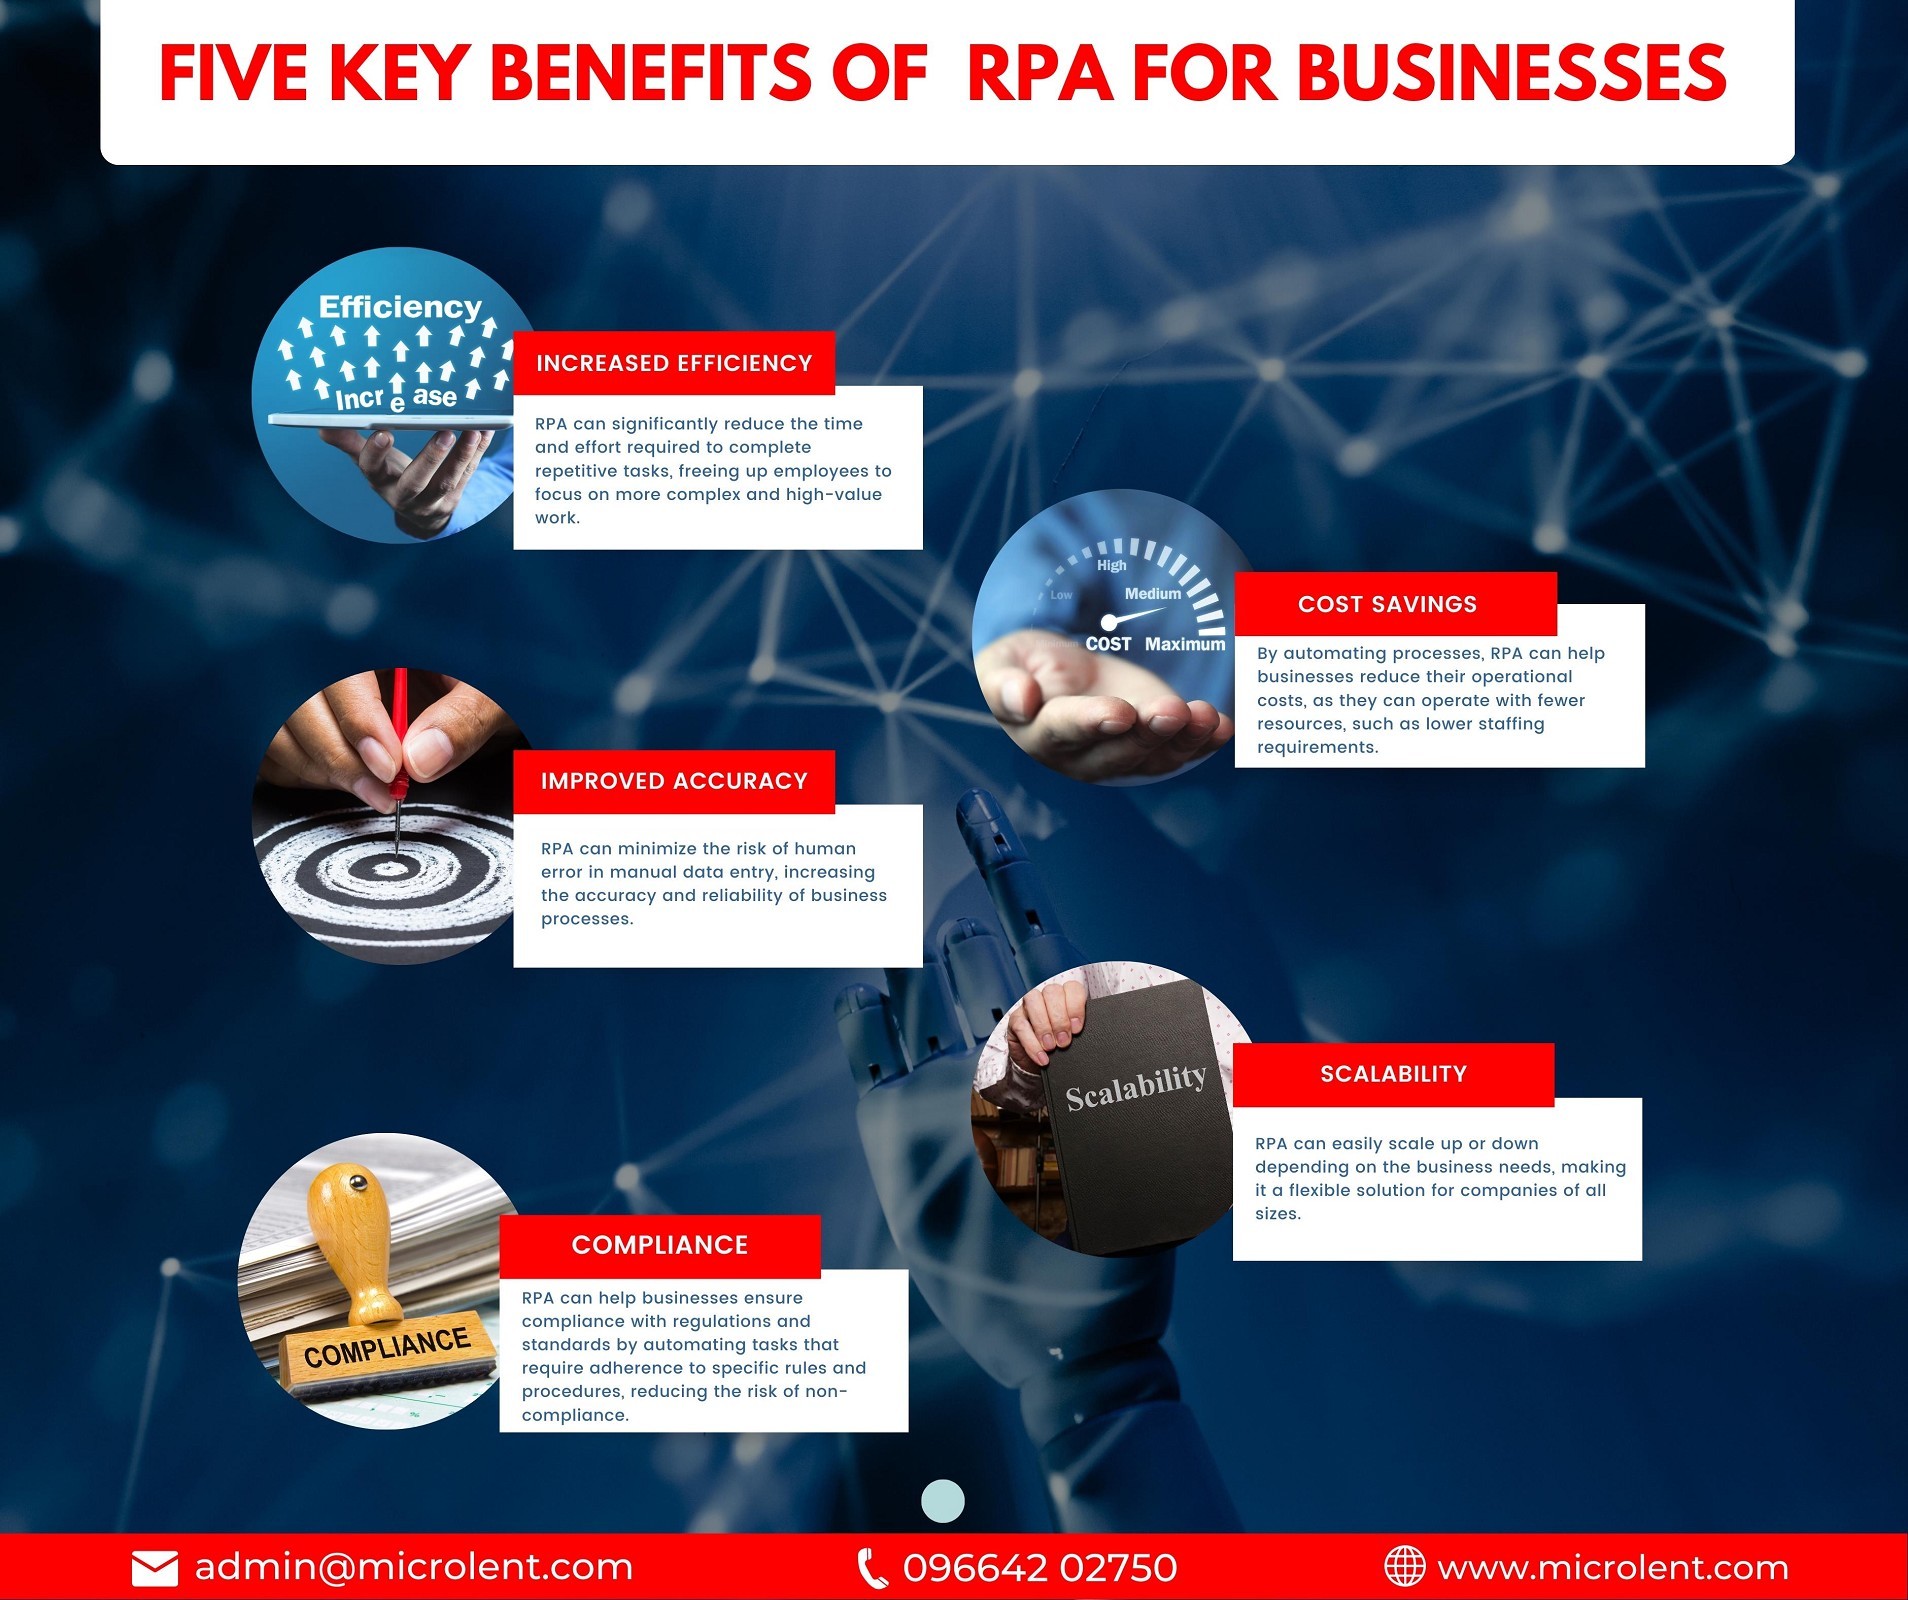 Five Key Benefits of Robotic Process Automation (RPA) for Businesses